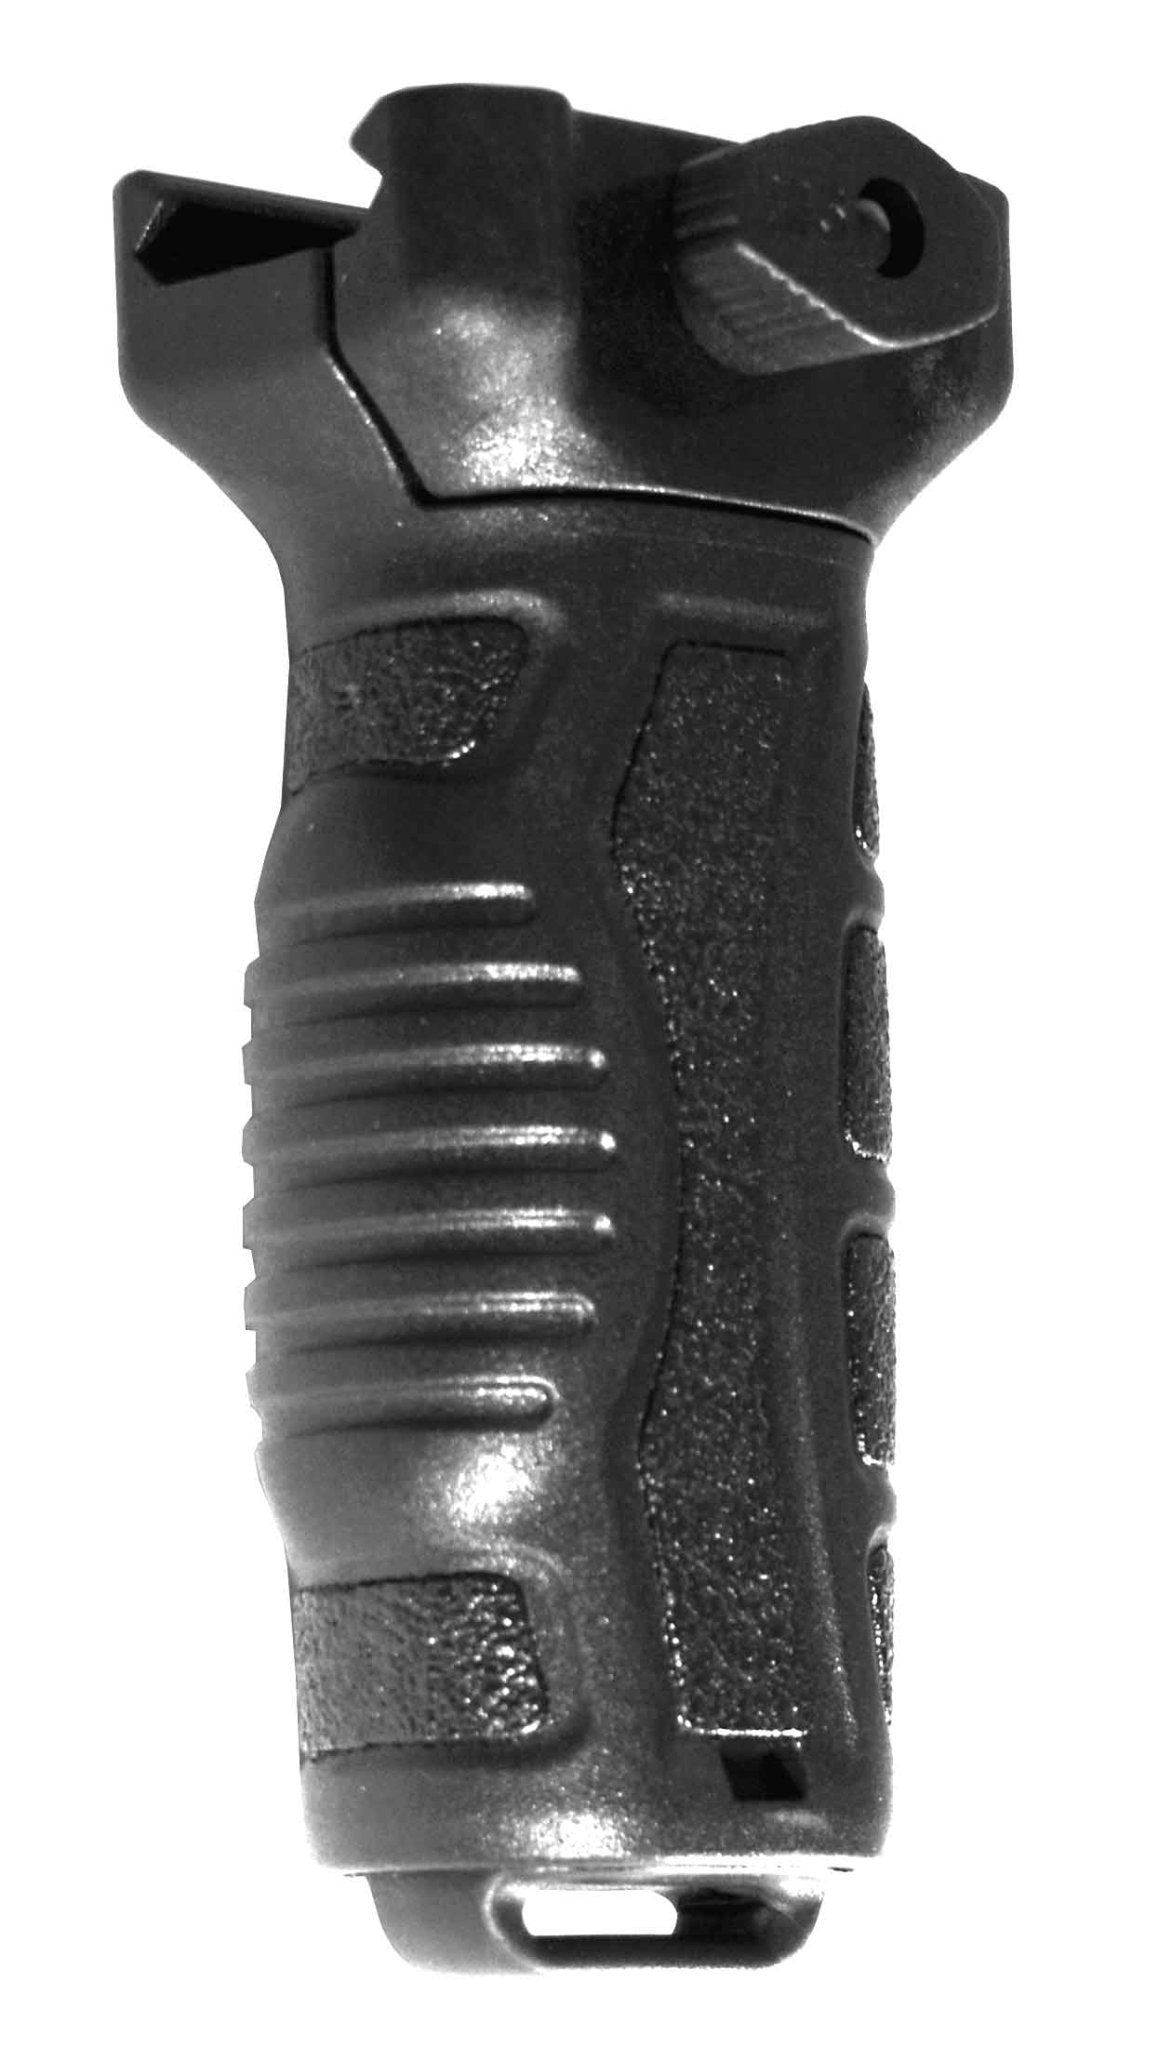 Picatinny Tactical Foregrip For Rifles And Shotguns Black - TRINITY SUPPLY INC